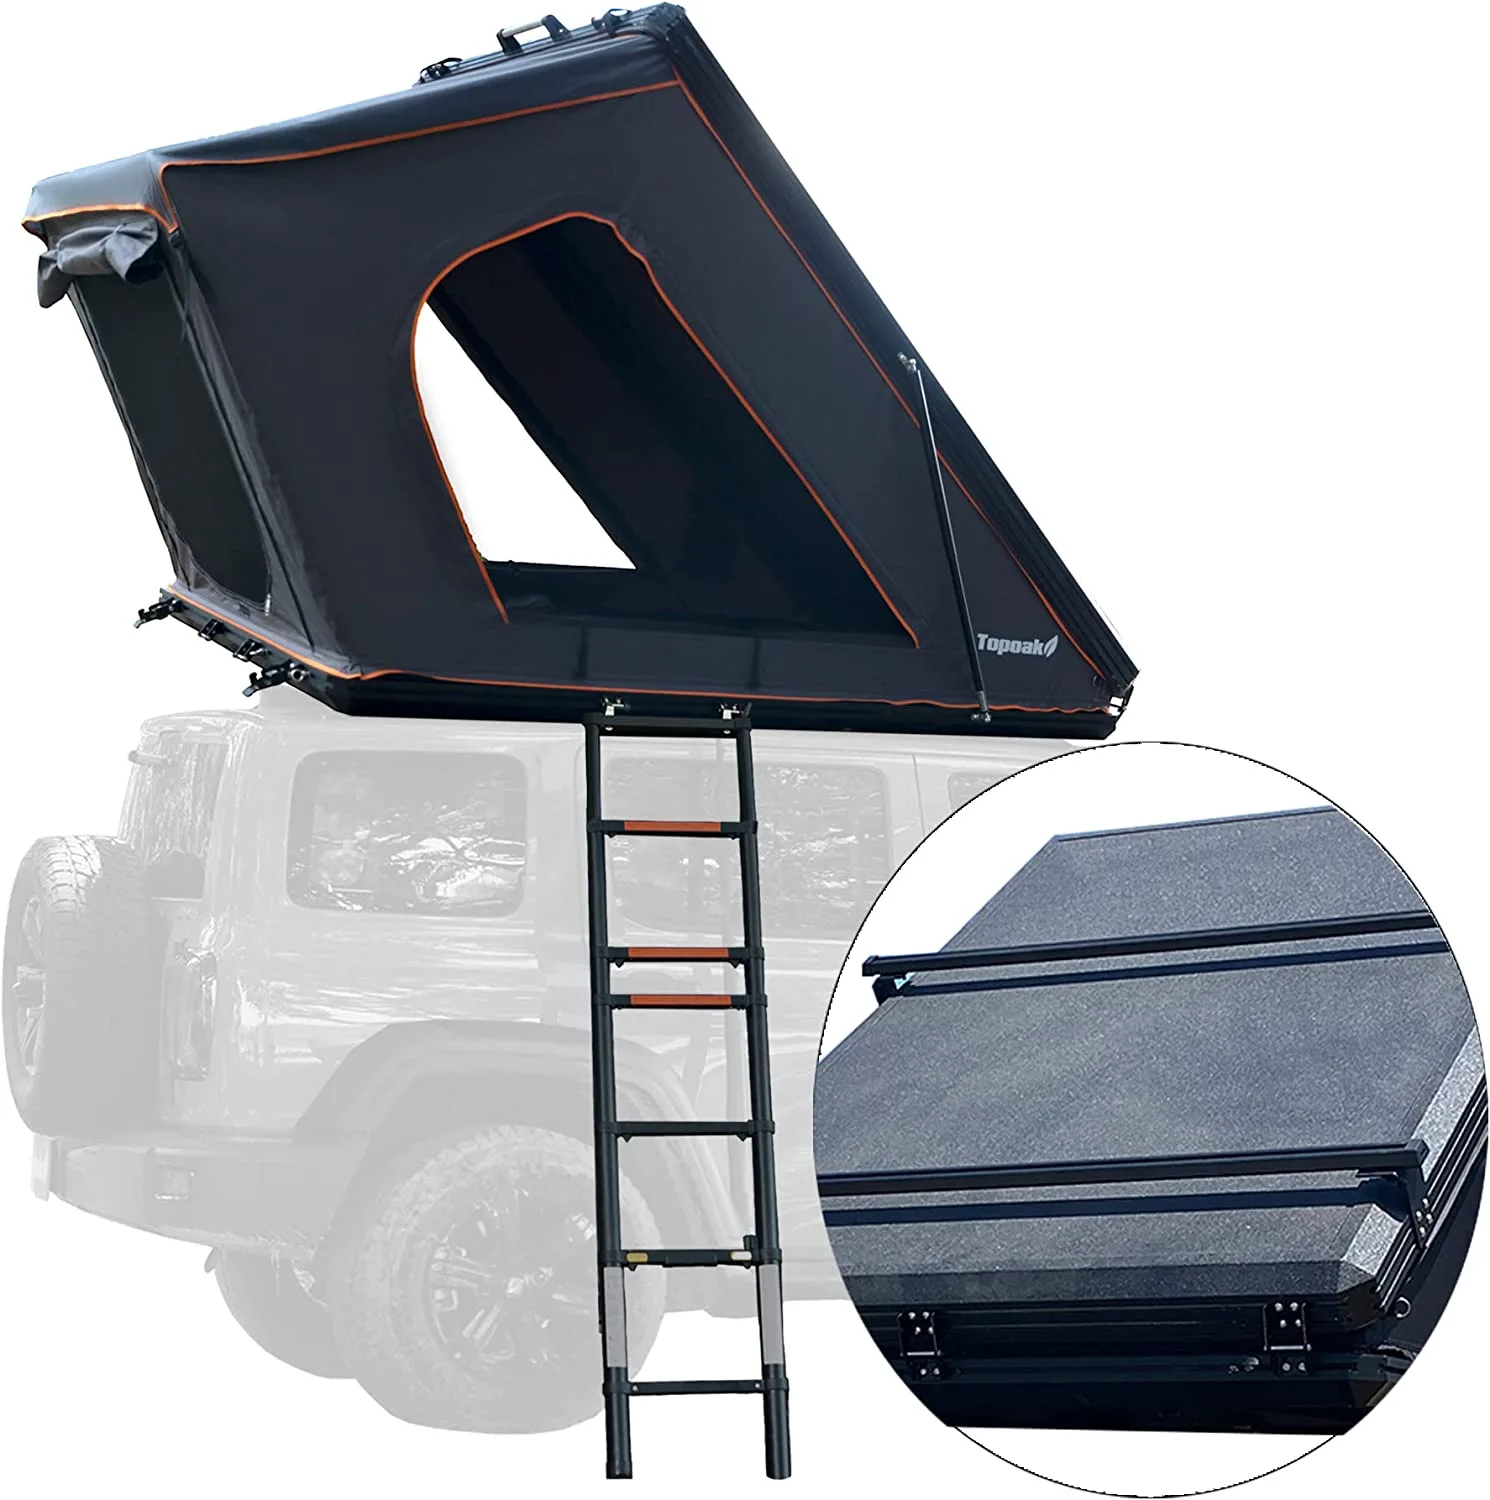 Topoak pop up roof top tent for SUVs and Jeeps - best rooftop tents for SUVs and Jeep